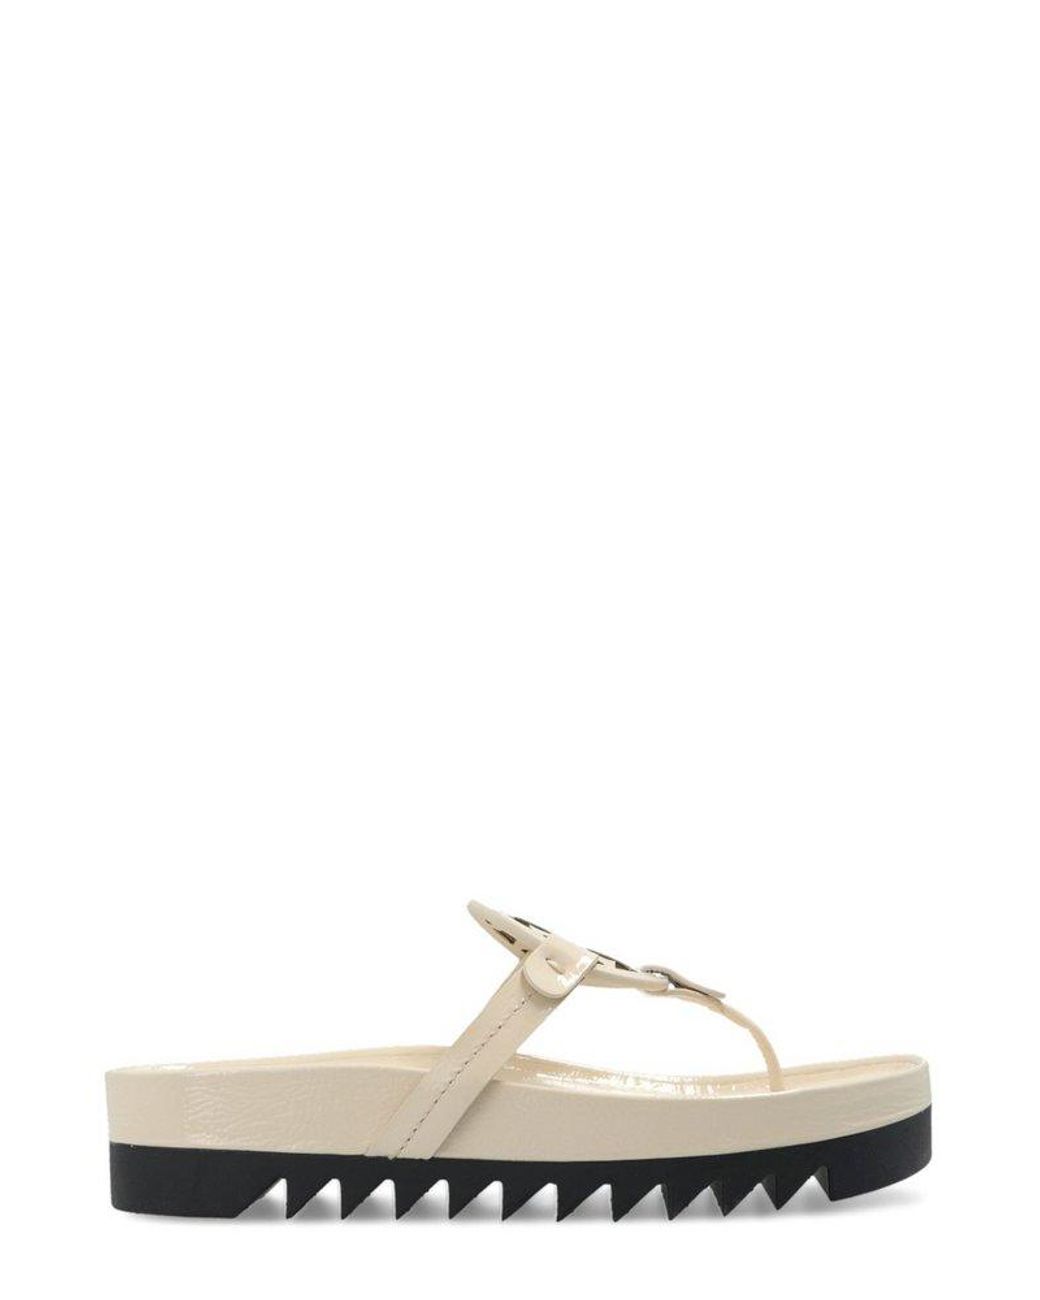 Tory Burch Miller Cloud Lug Sandals in White | Lyst